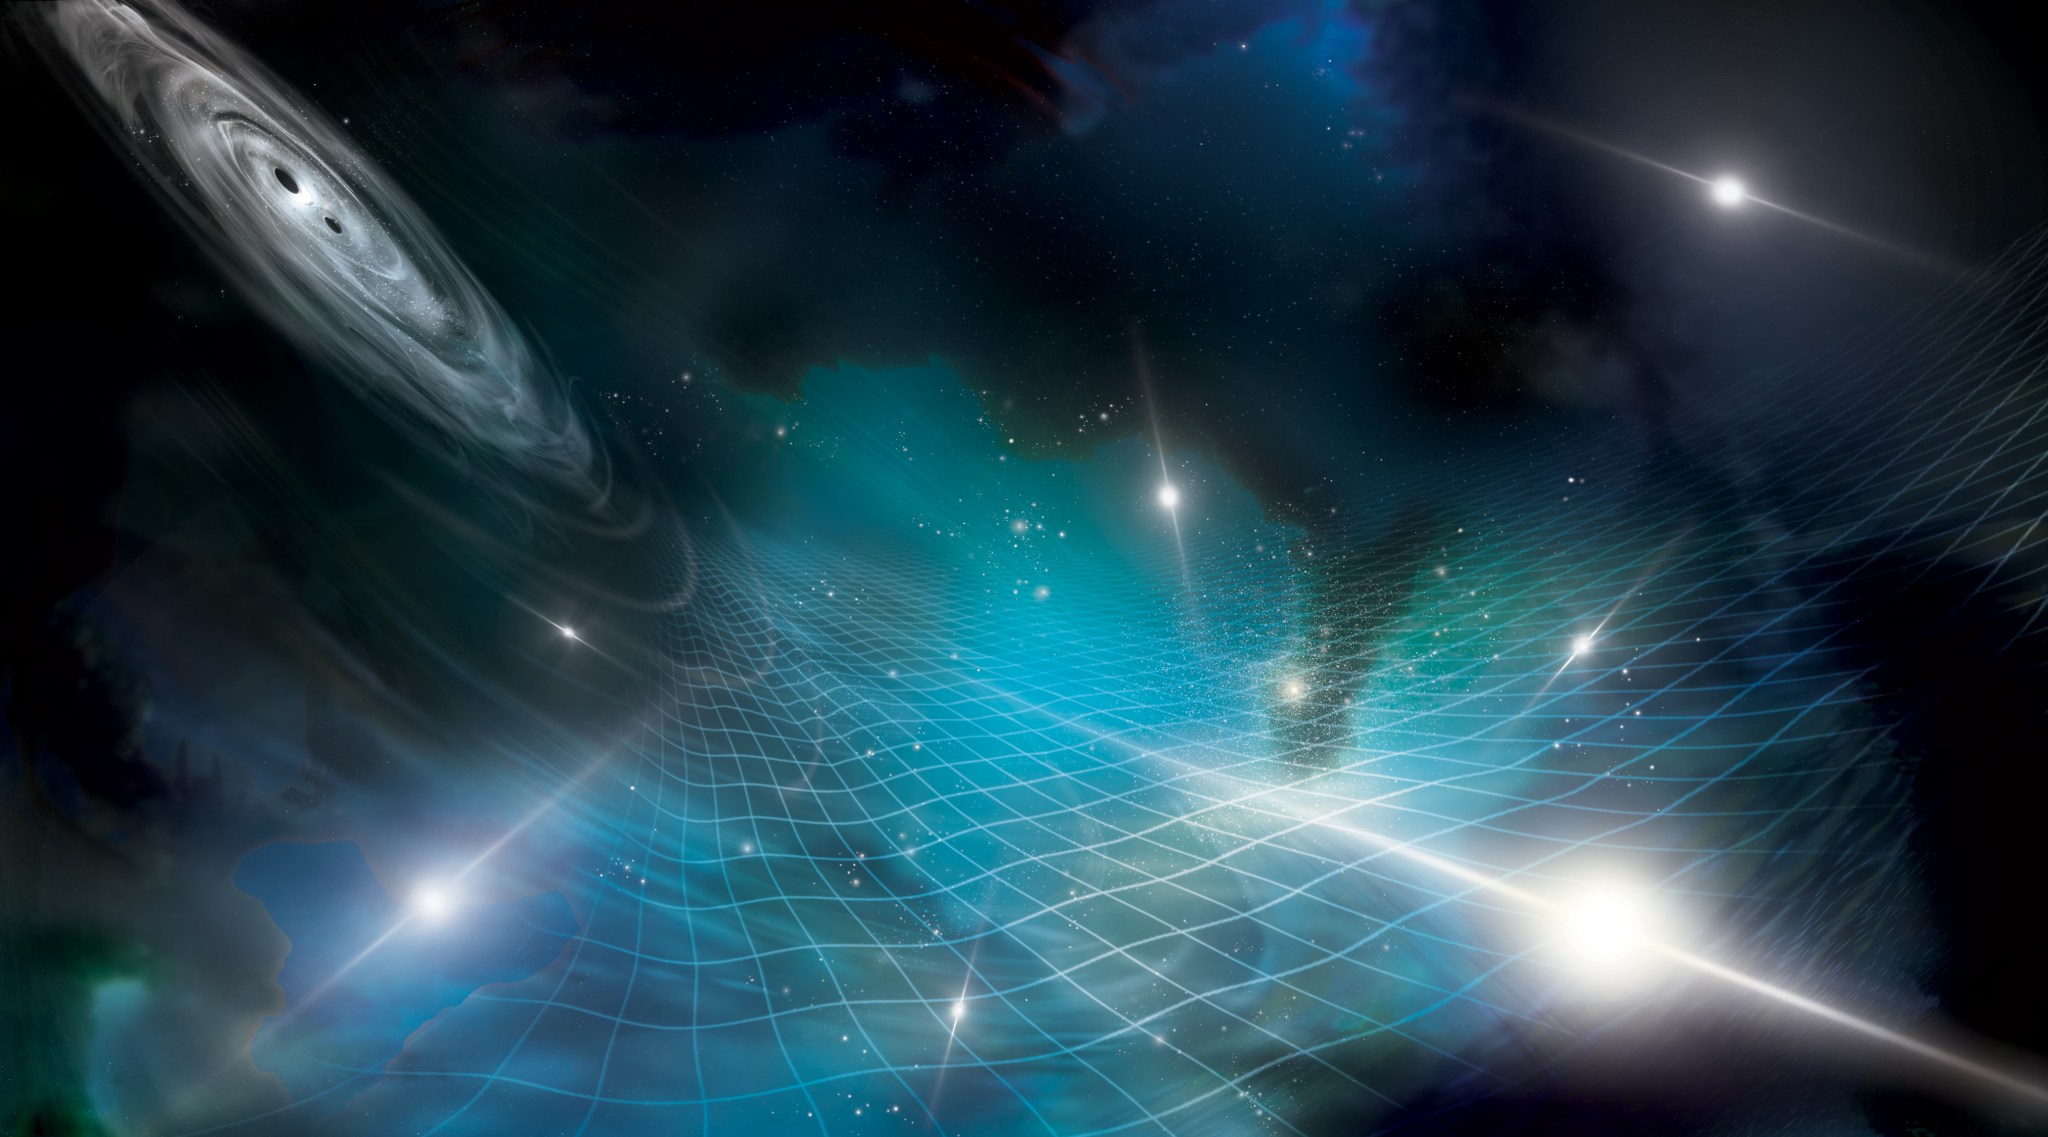 This artist’s concept shows stars, black holes, and nebula laid over a grid representing the fabric of space-time.